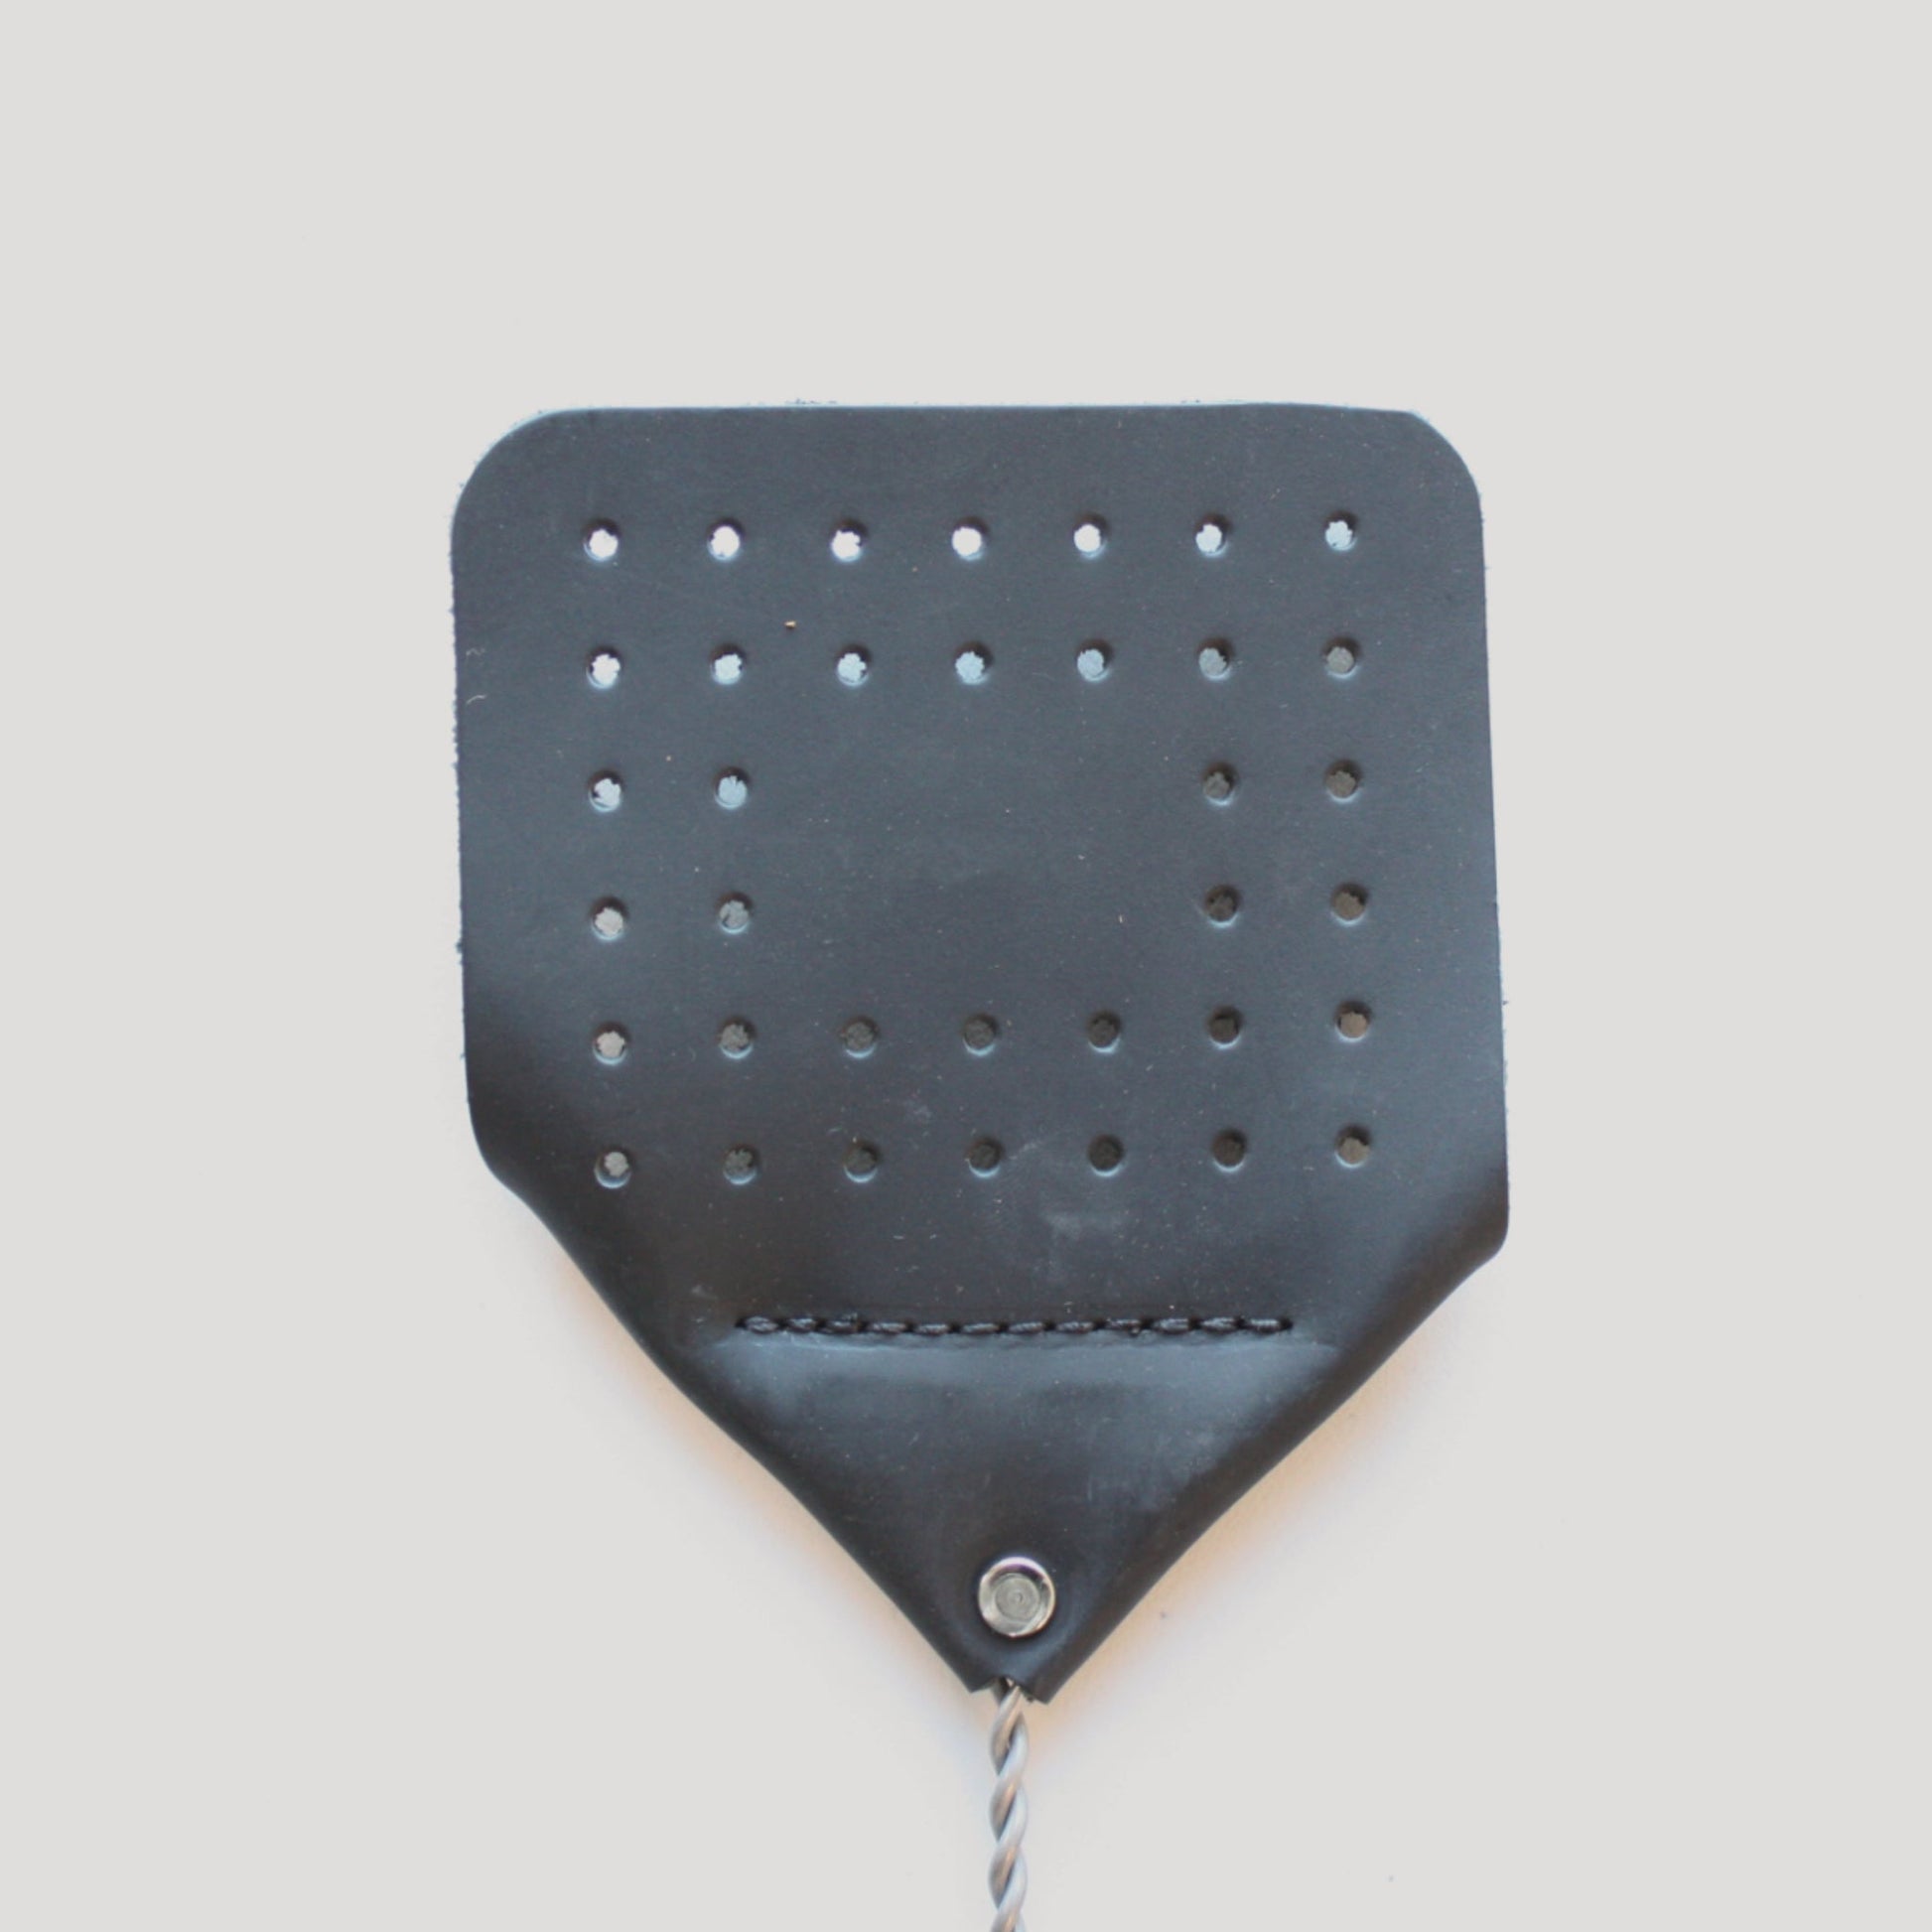 Leather Flyswatter - Made in the USA